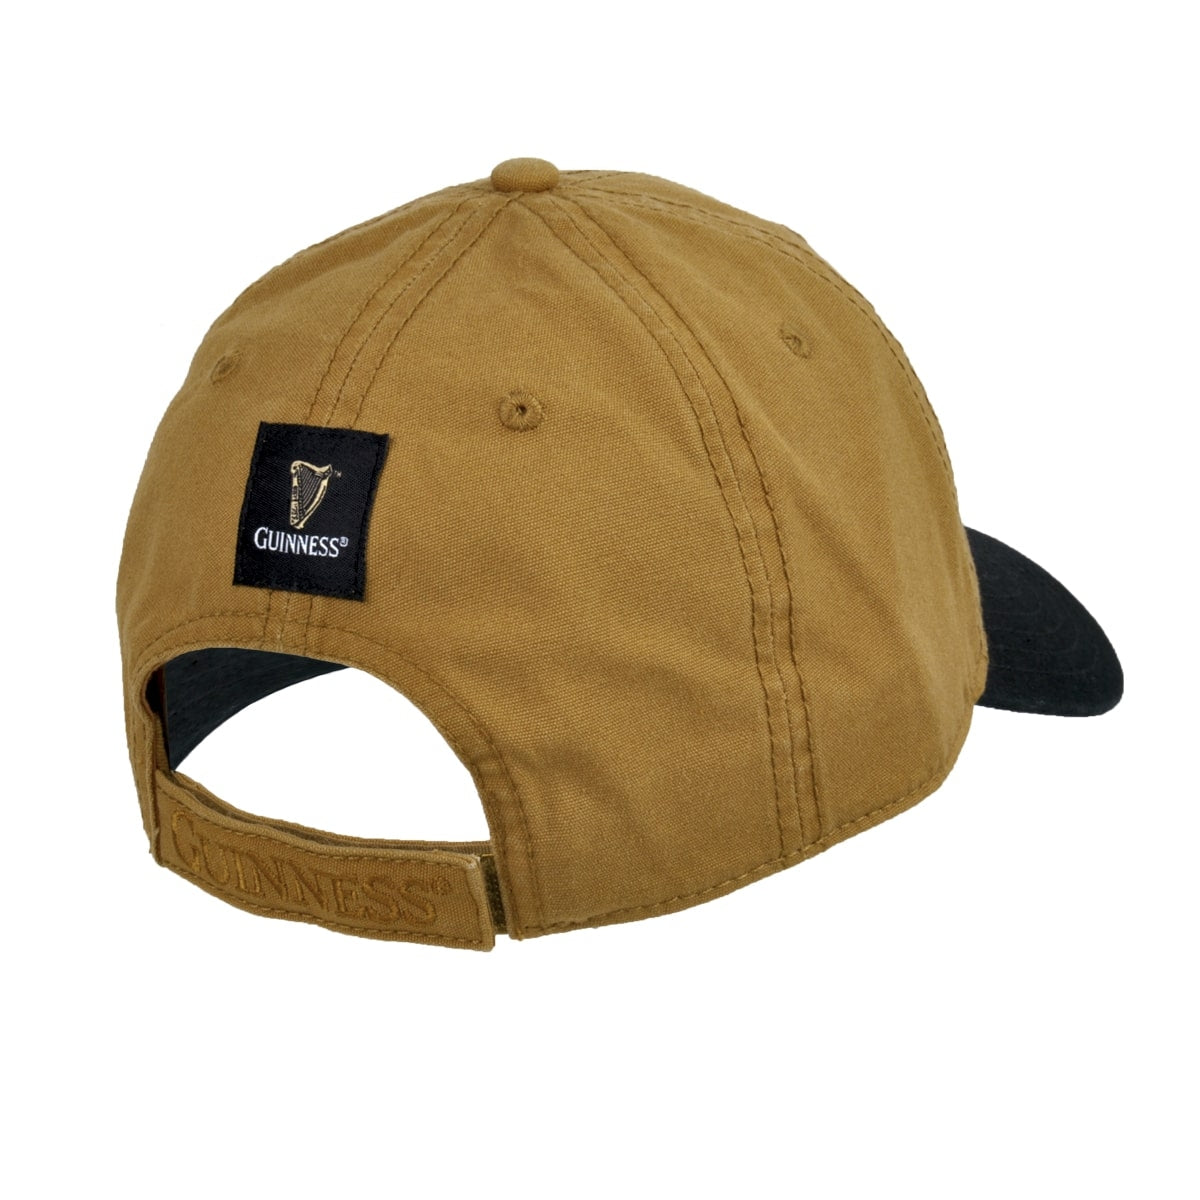 Guinness Premium Camel & Black with Black Leather Patch Cap